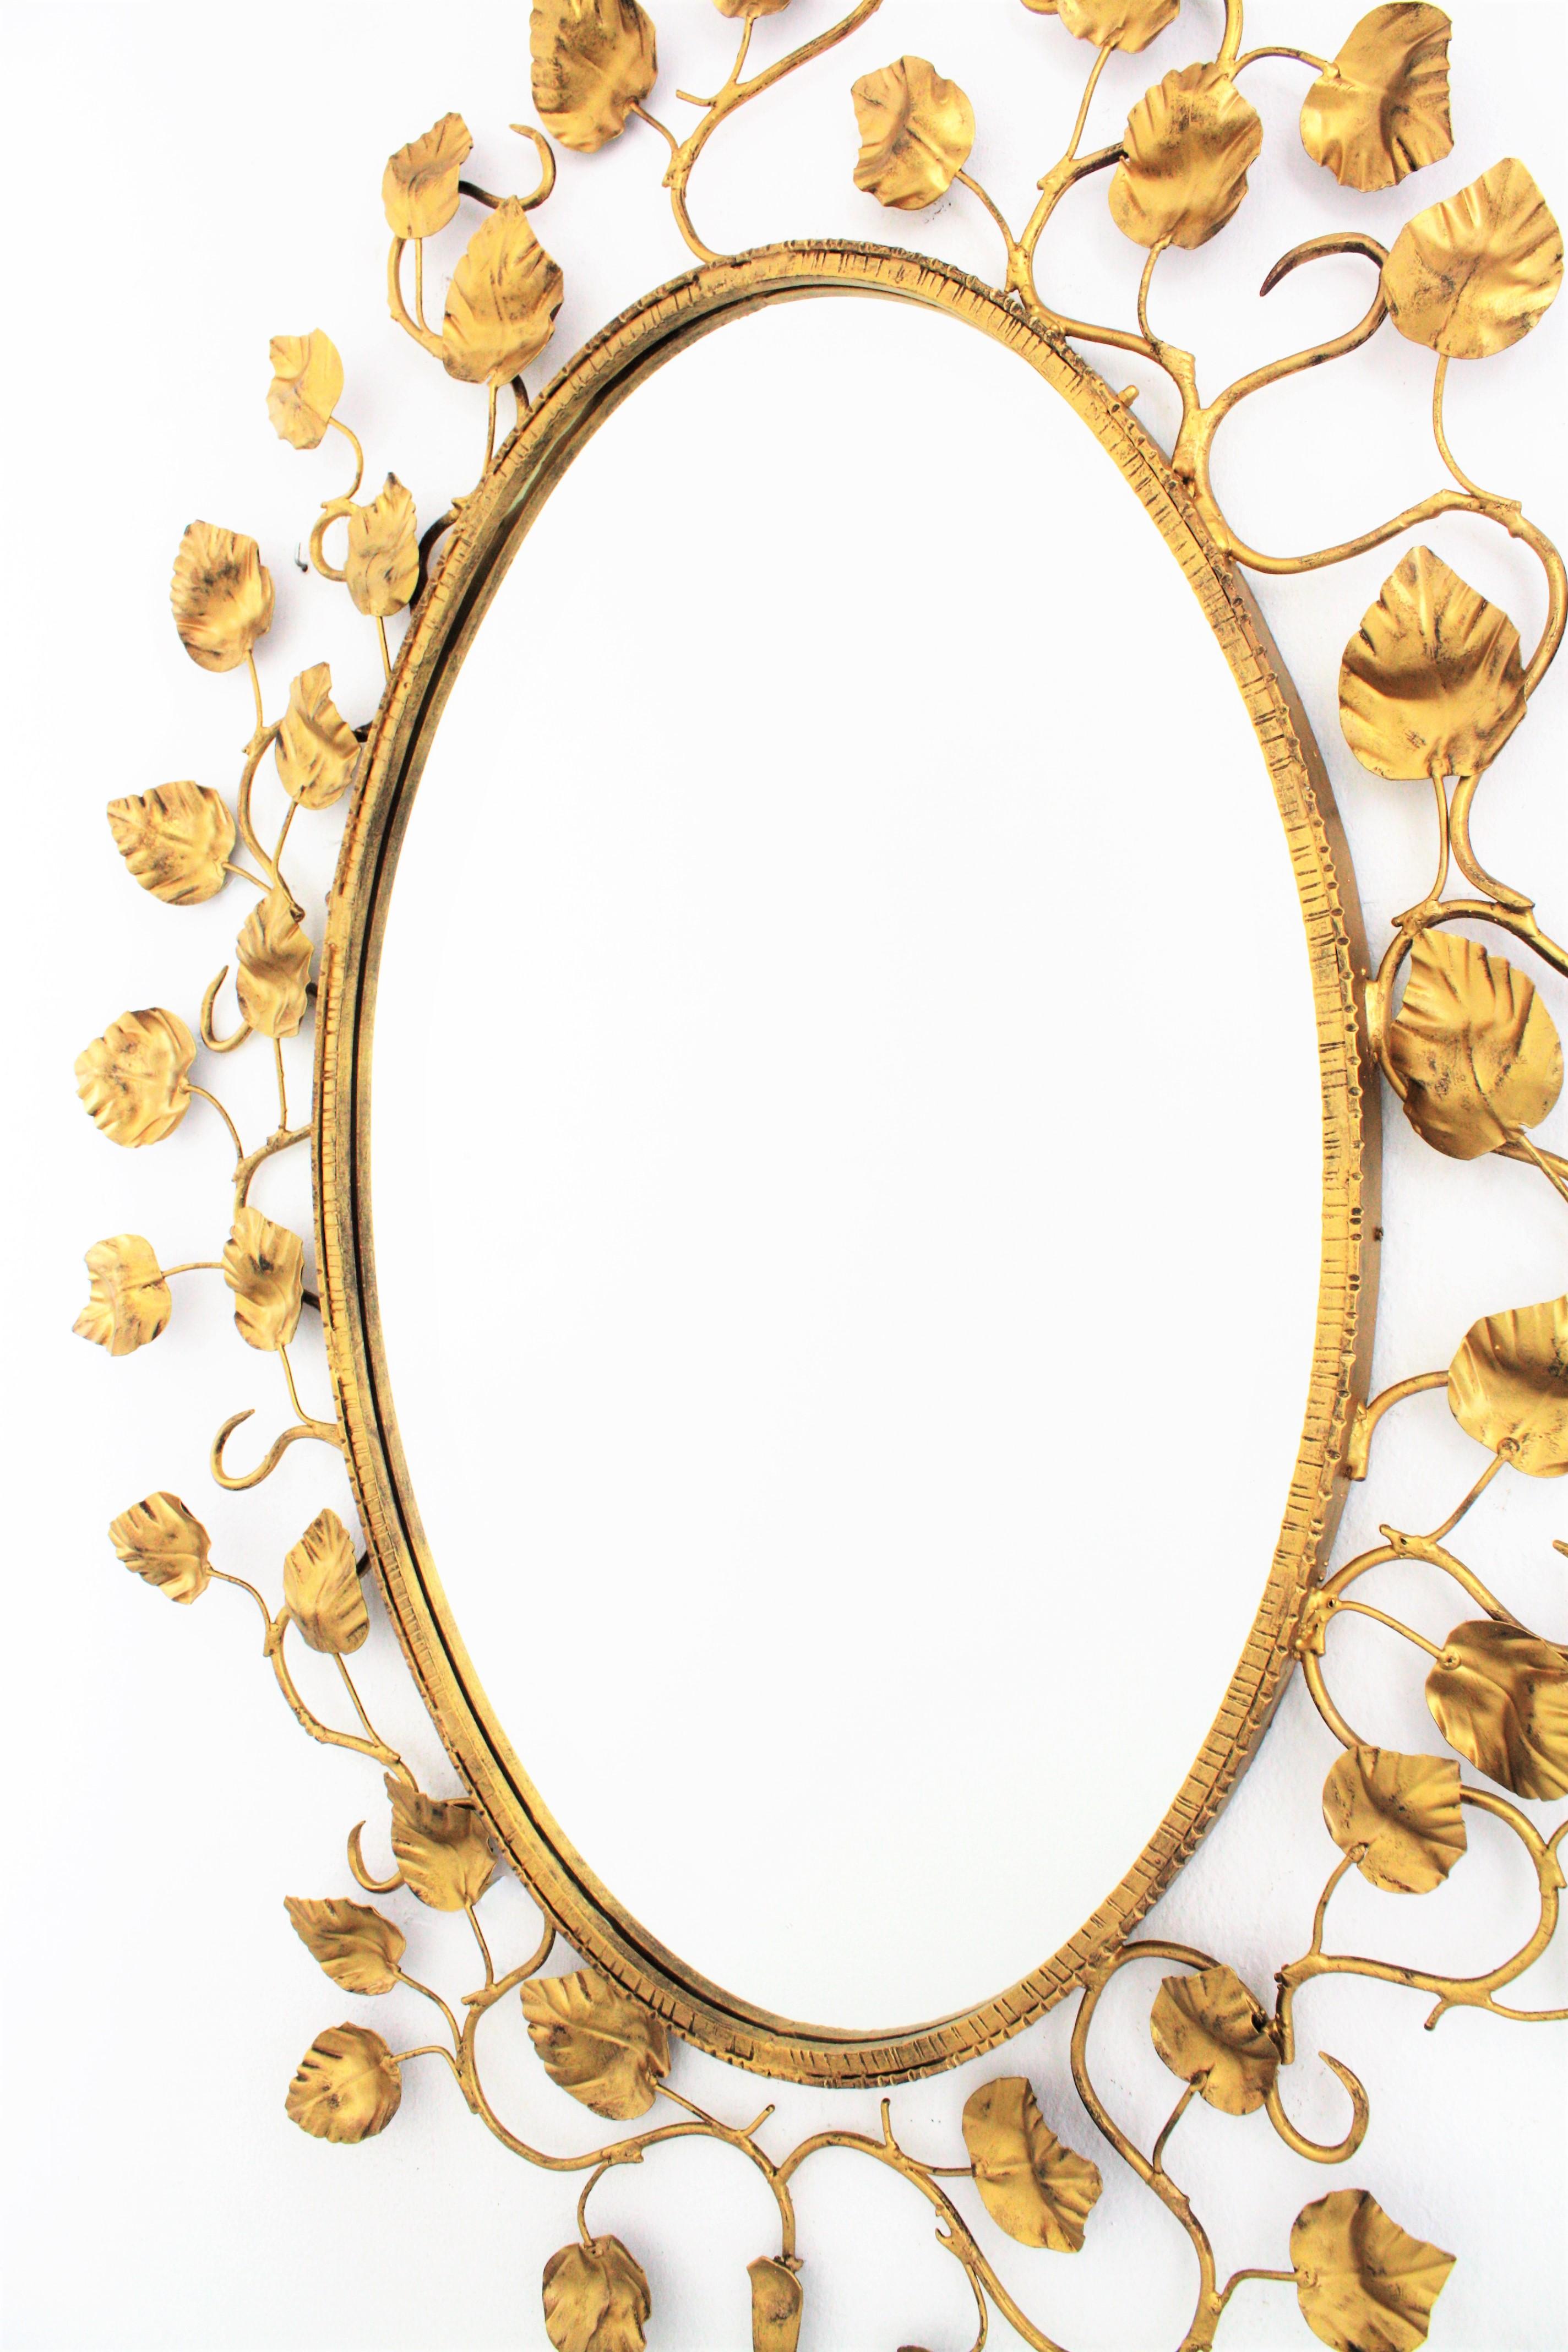 Metal Spanish Large Oval Mirror in Gilt Iron Foliage Frame, 1950s For Sale